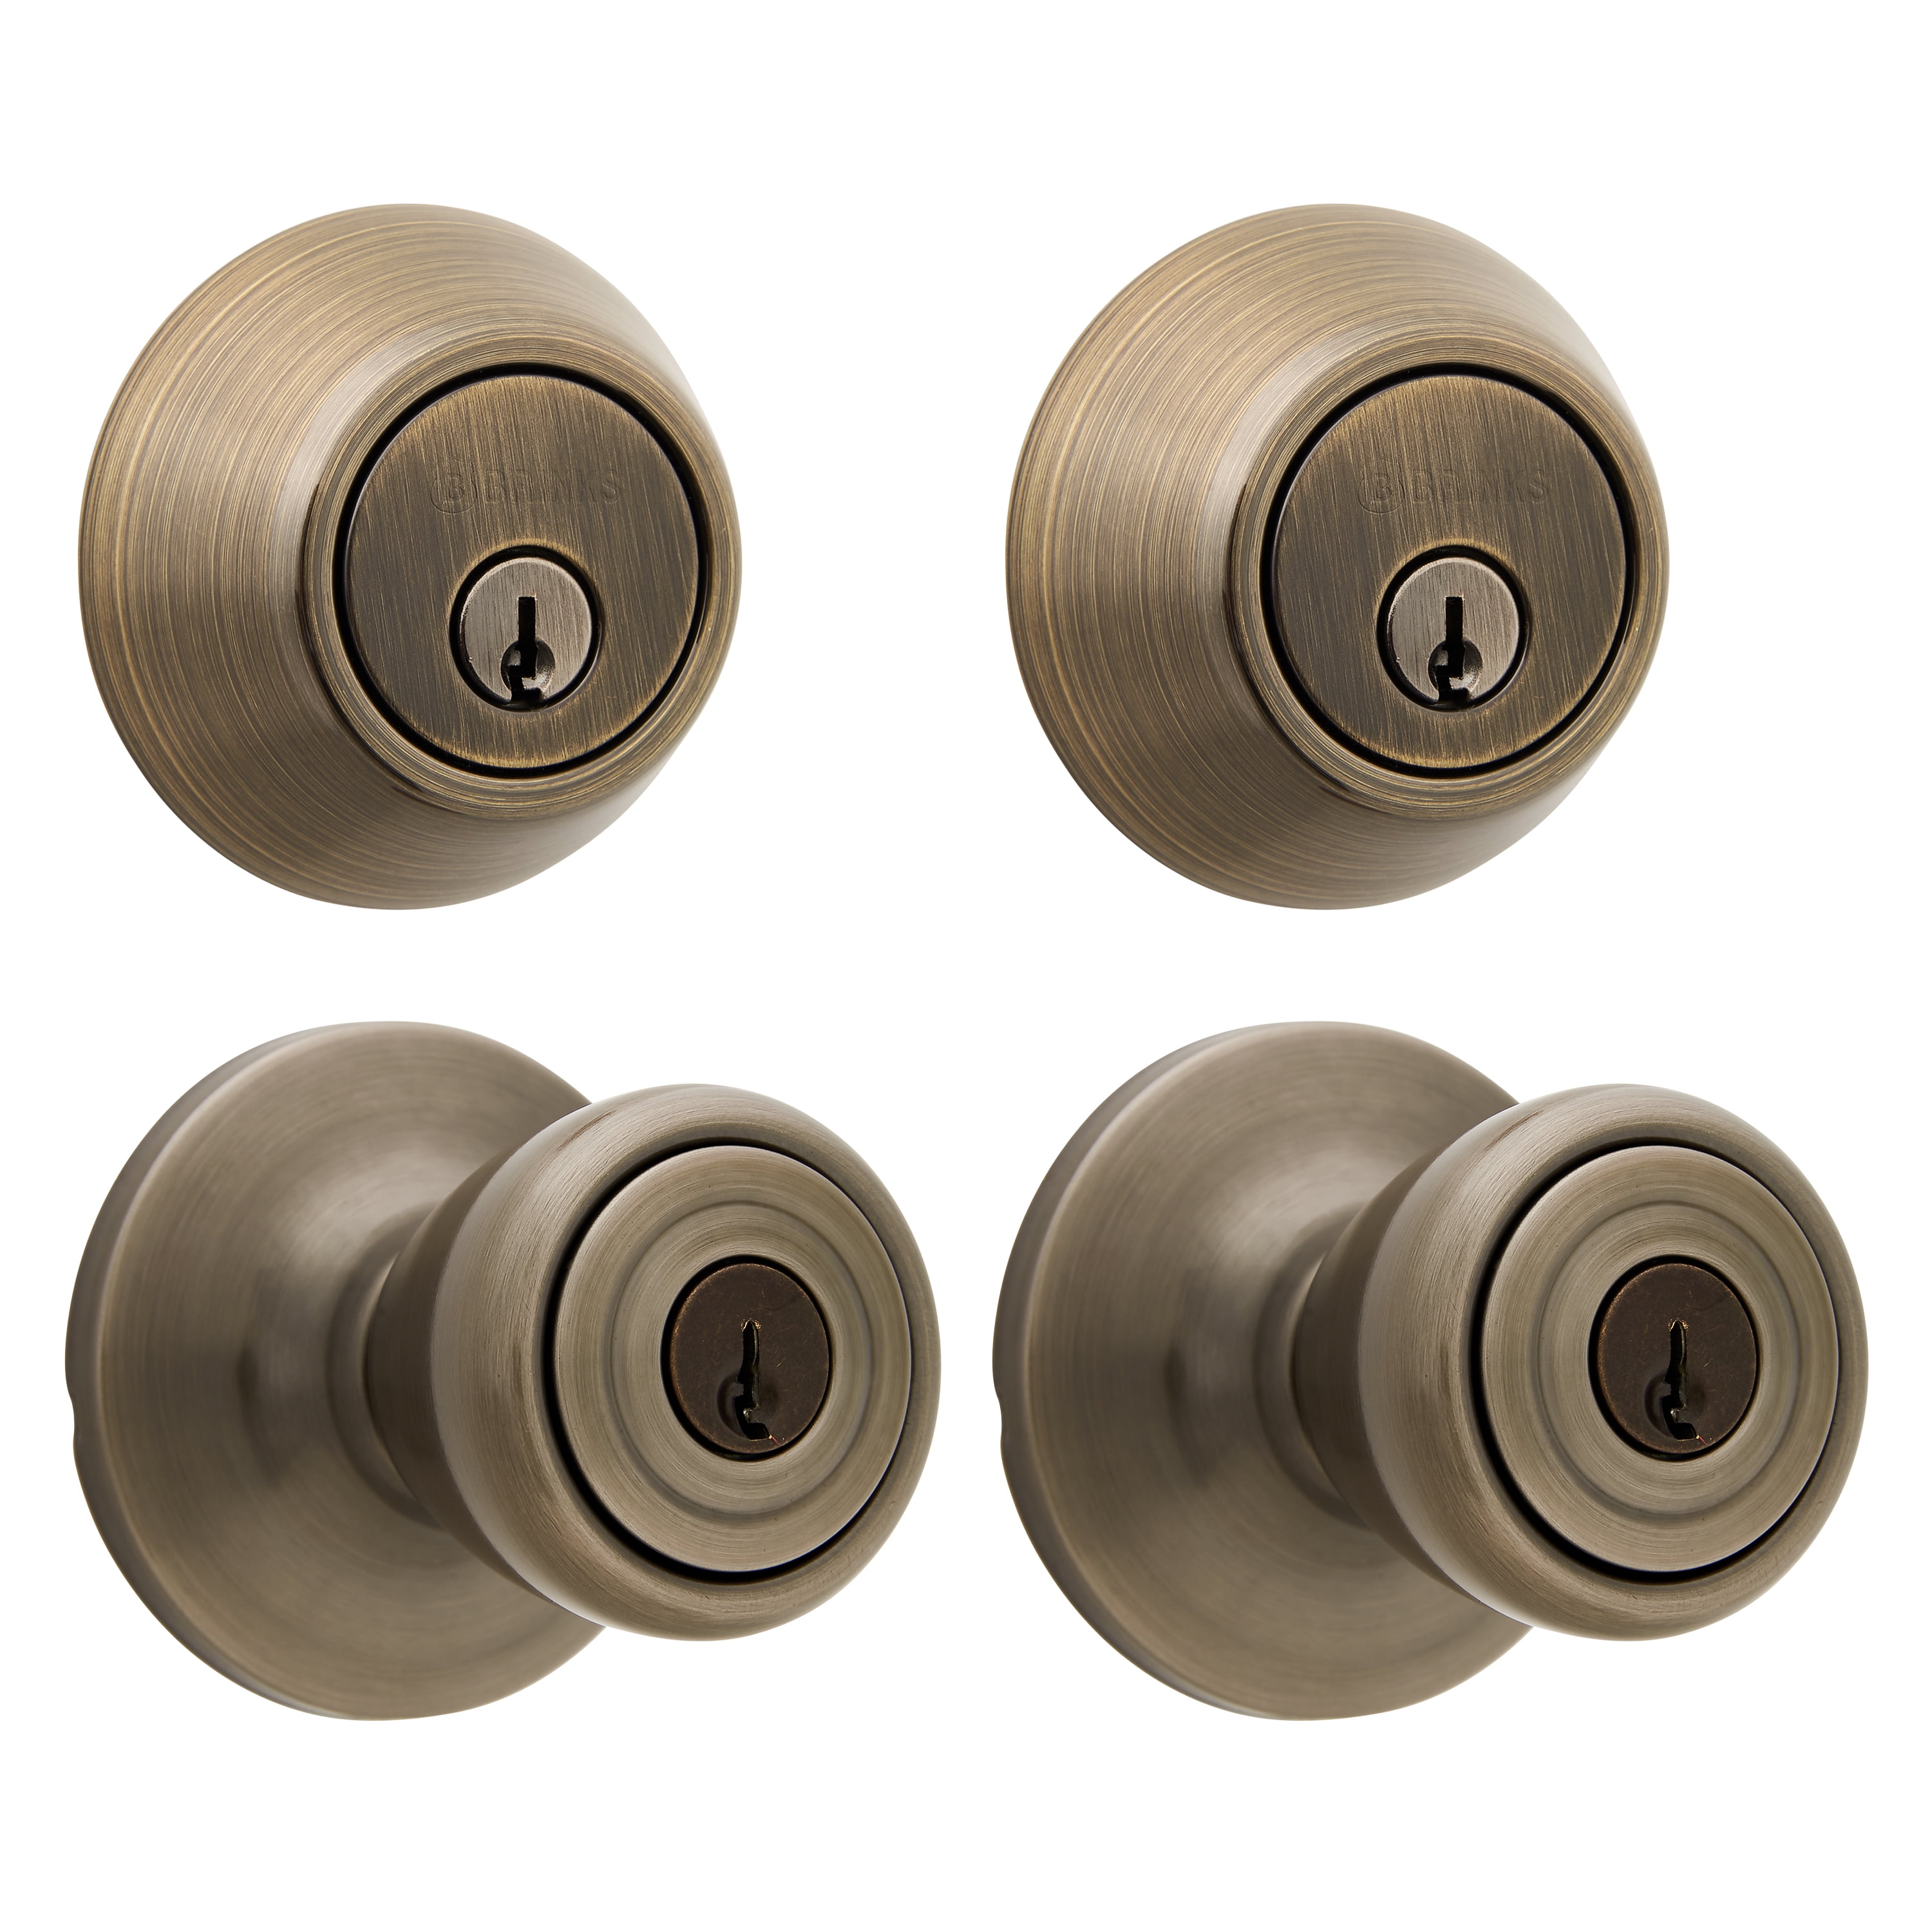 Brinks Keyed Entry Doorknob and Deadbolt Combo, Antique Brass Finish, Twin  Pack